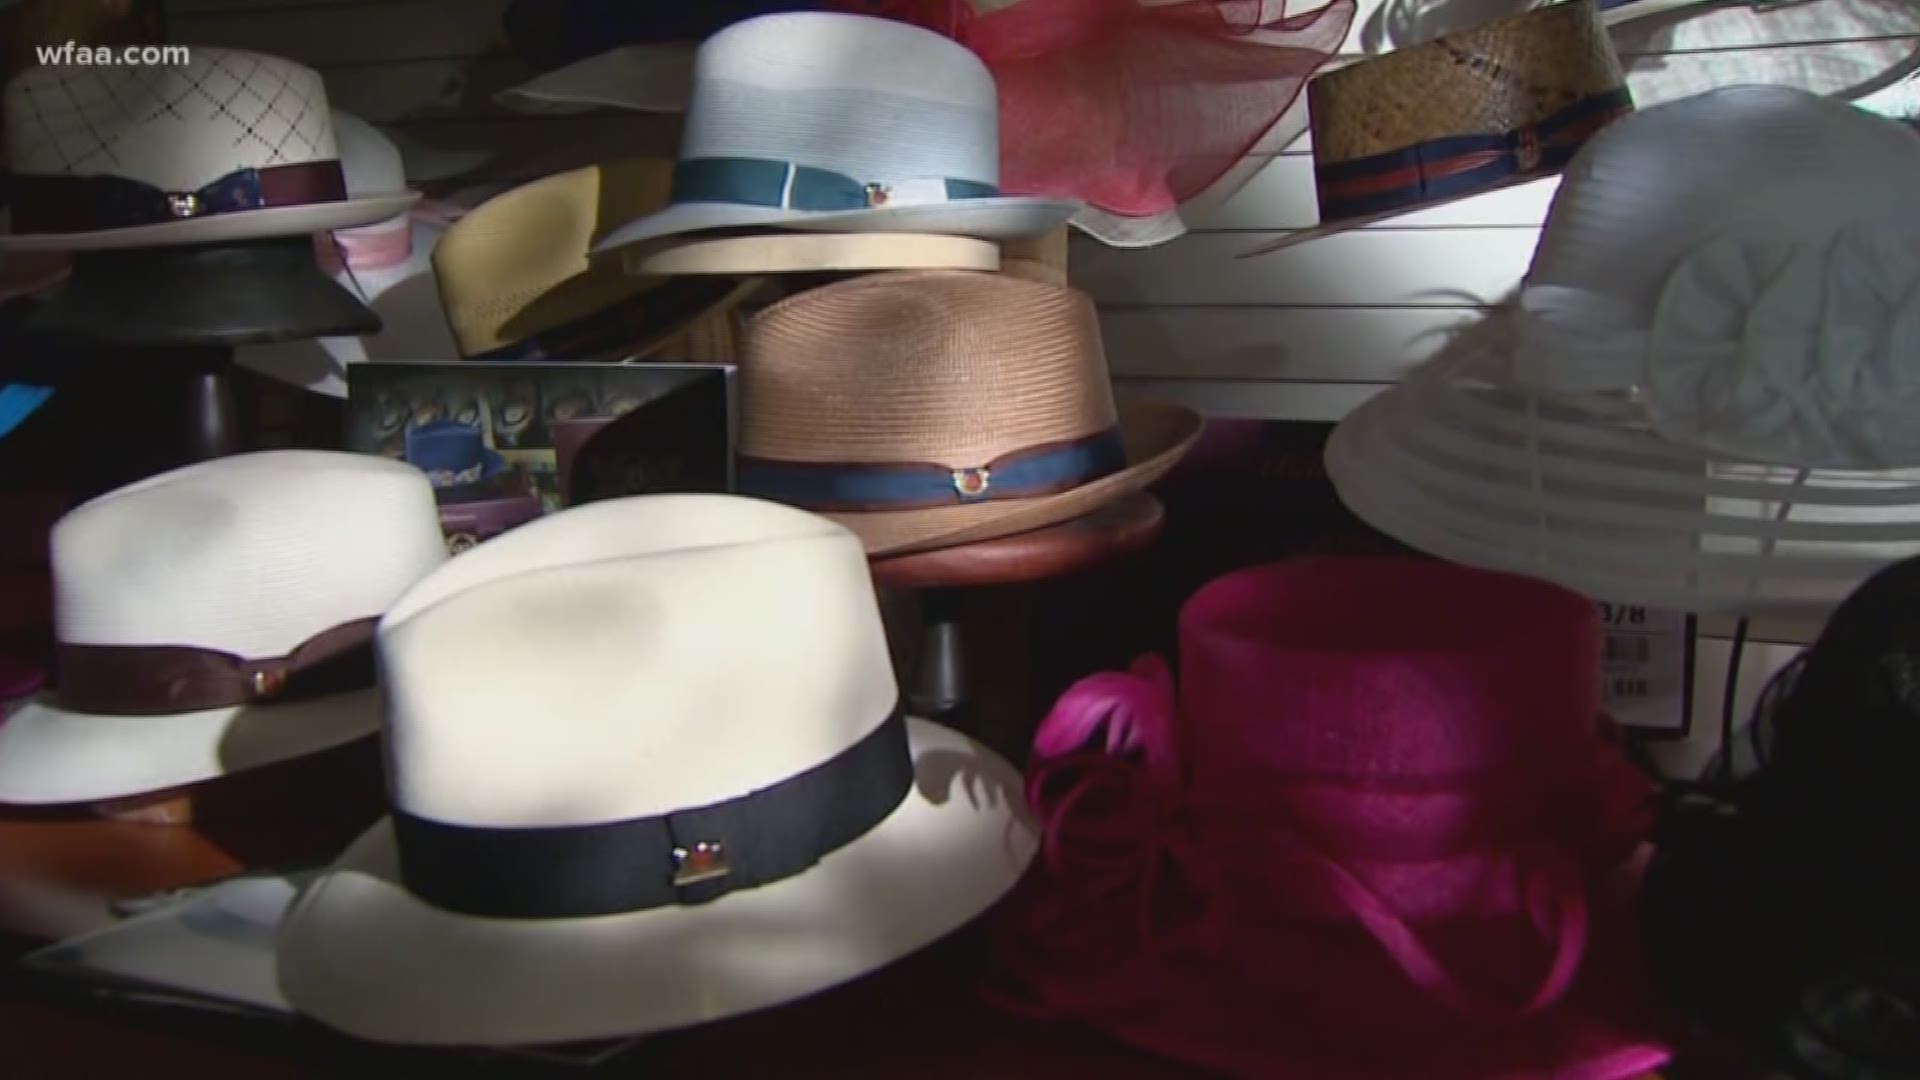 The Kentucky Derby wouldn't be the same without the Milano Hat Company located in Garland. Find out how their hand-crafted masterpieces became the official hat of the Derby.